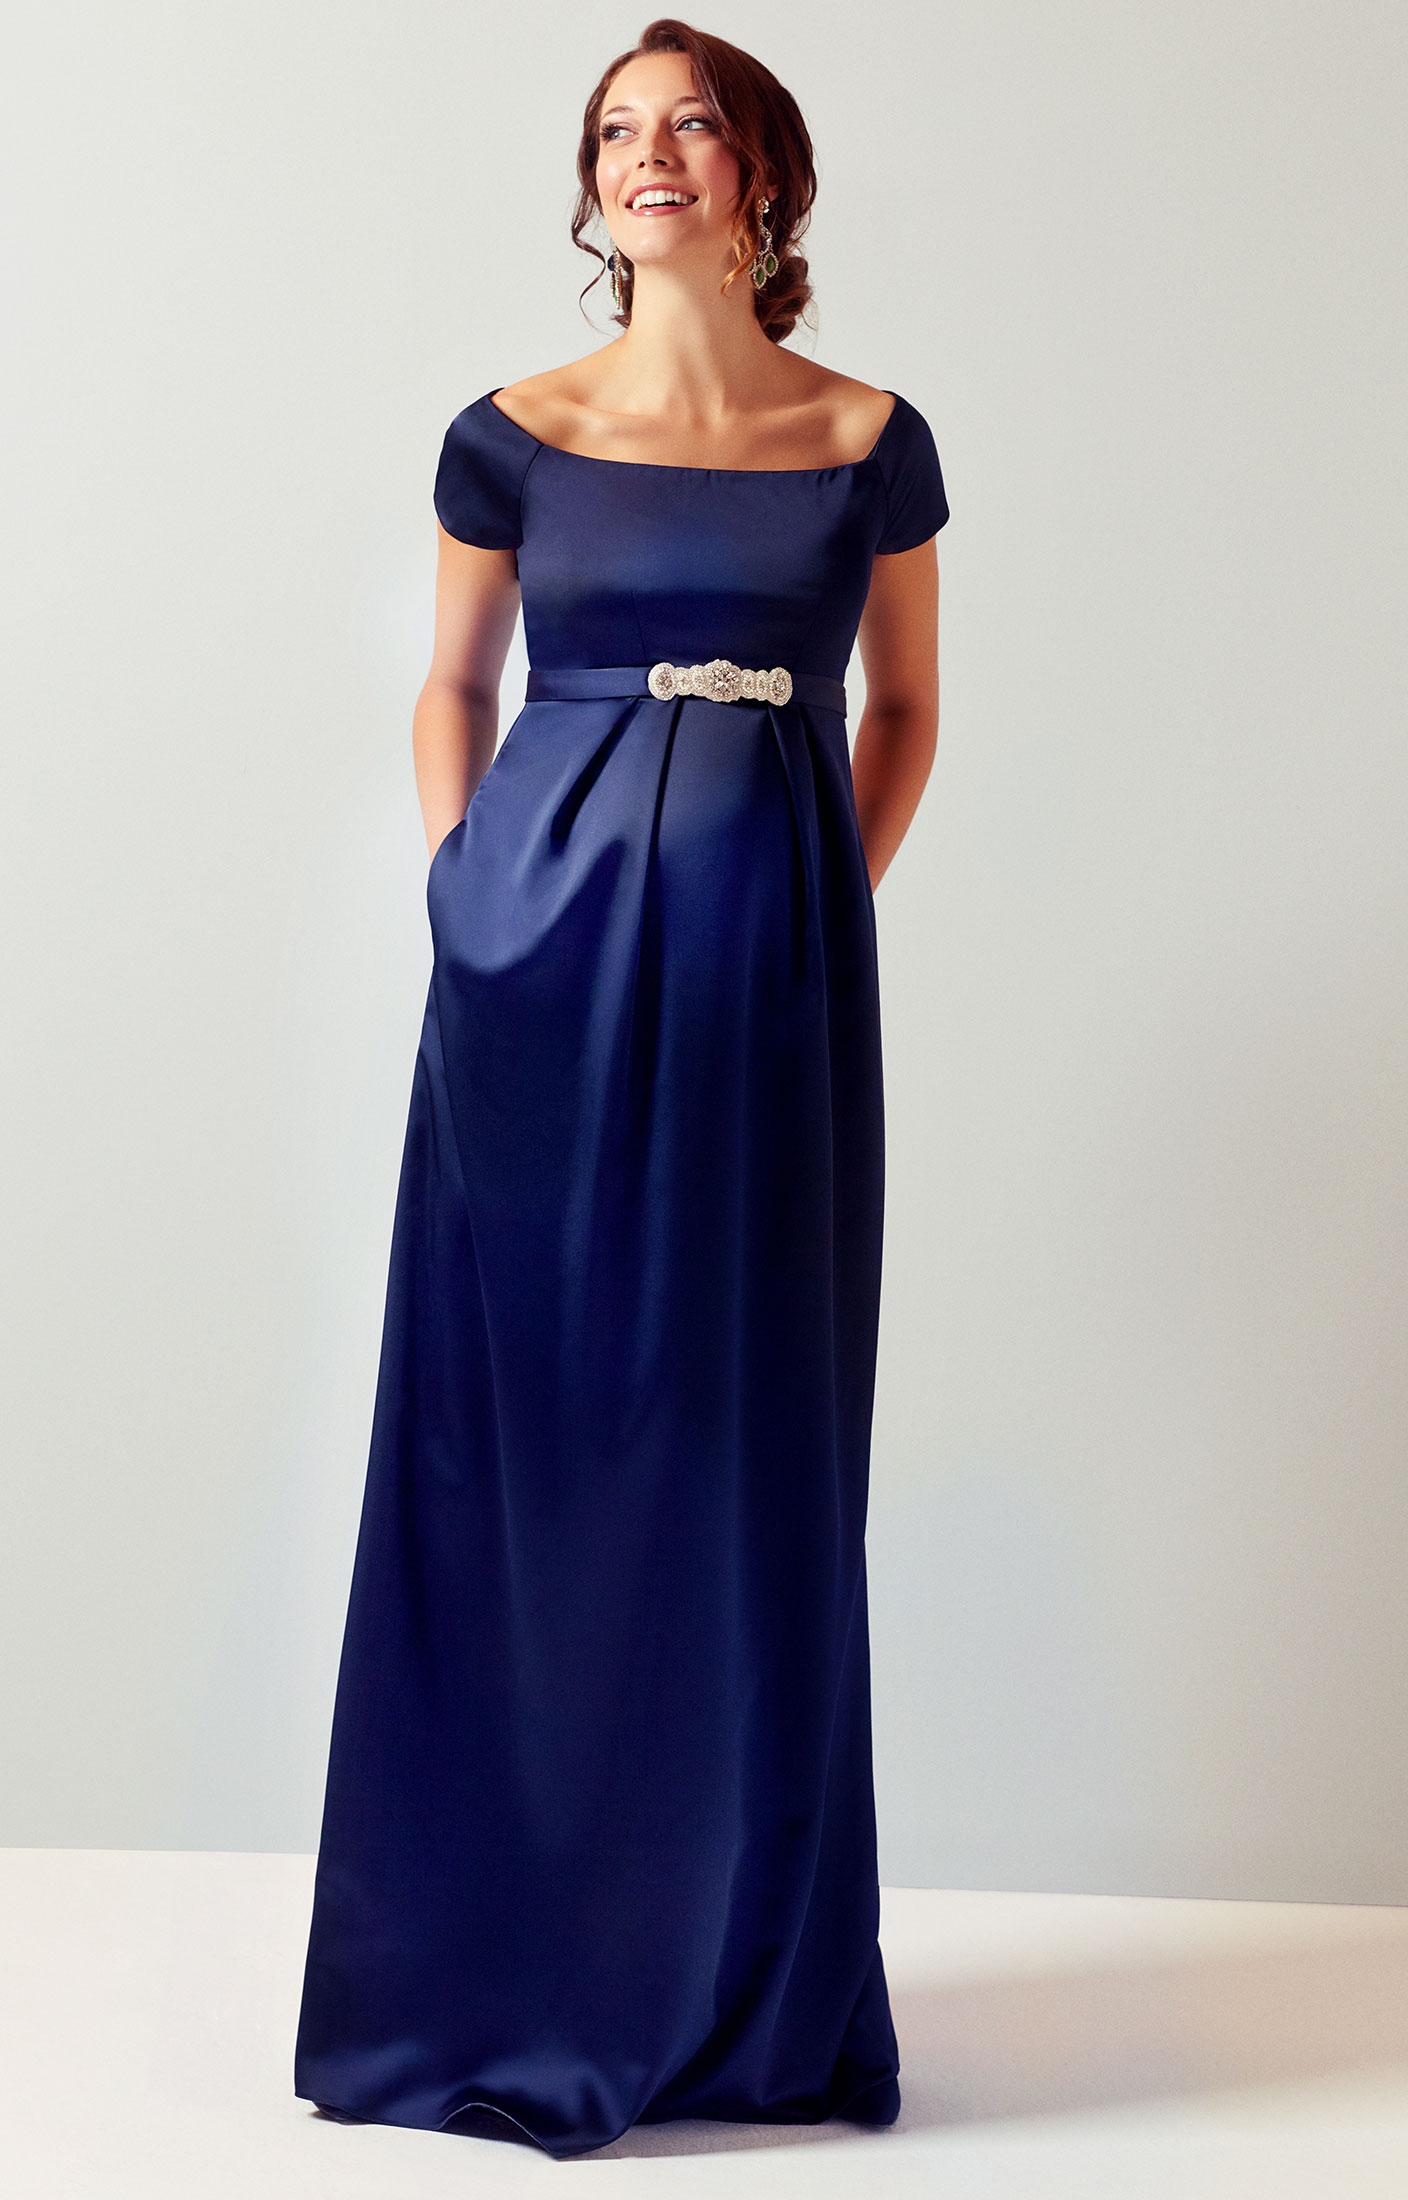 Madison Stramme Sui Aria Maternity Gown Midnight Blue - Maternity Wedding Dresses, Evening Wear  and Party Clothes by Tiffany Rose US